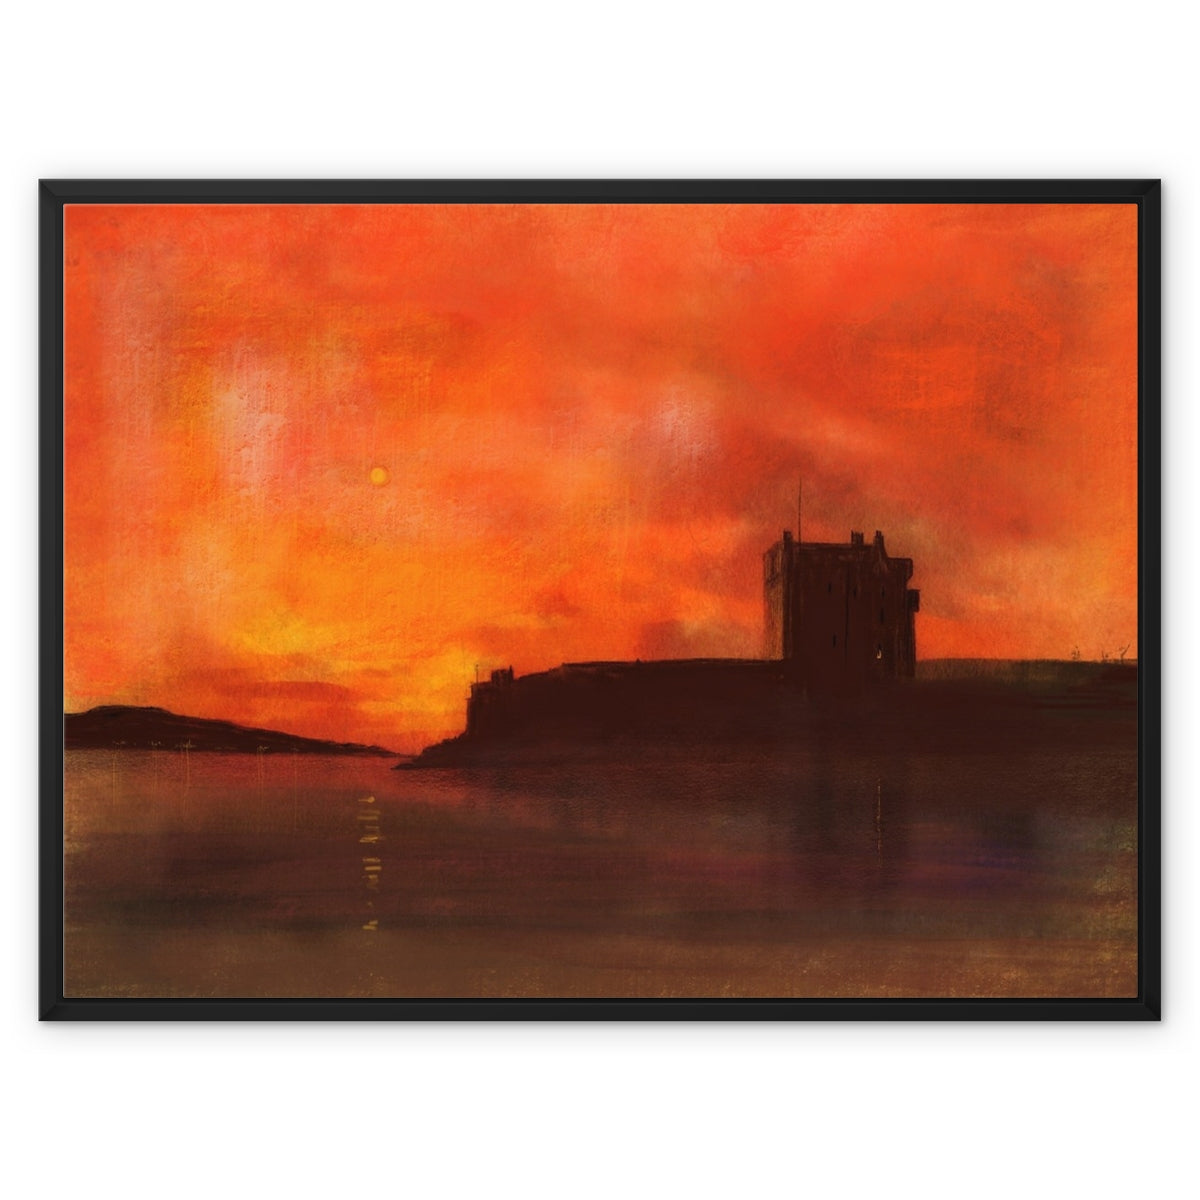 Broughty Castle Sunset Painting | Framed Canvas From Scotland-Floating Framed Canvas Prints-Historic & Iconic Scotland Art Gallery-32"x24"-Black Frame-Paintings, Prints, Homeware, Art Gifts From Scotland By Scottish Artist Kevin Hunter